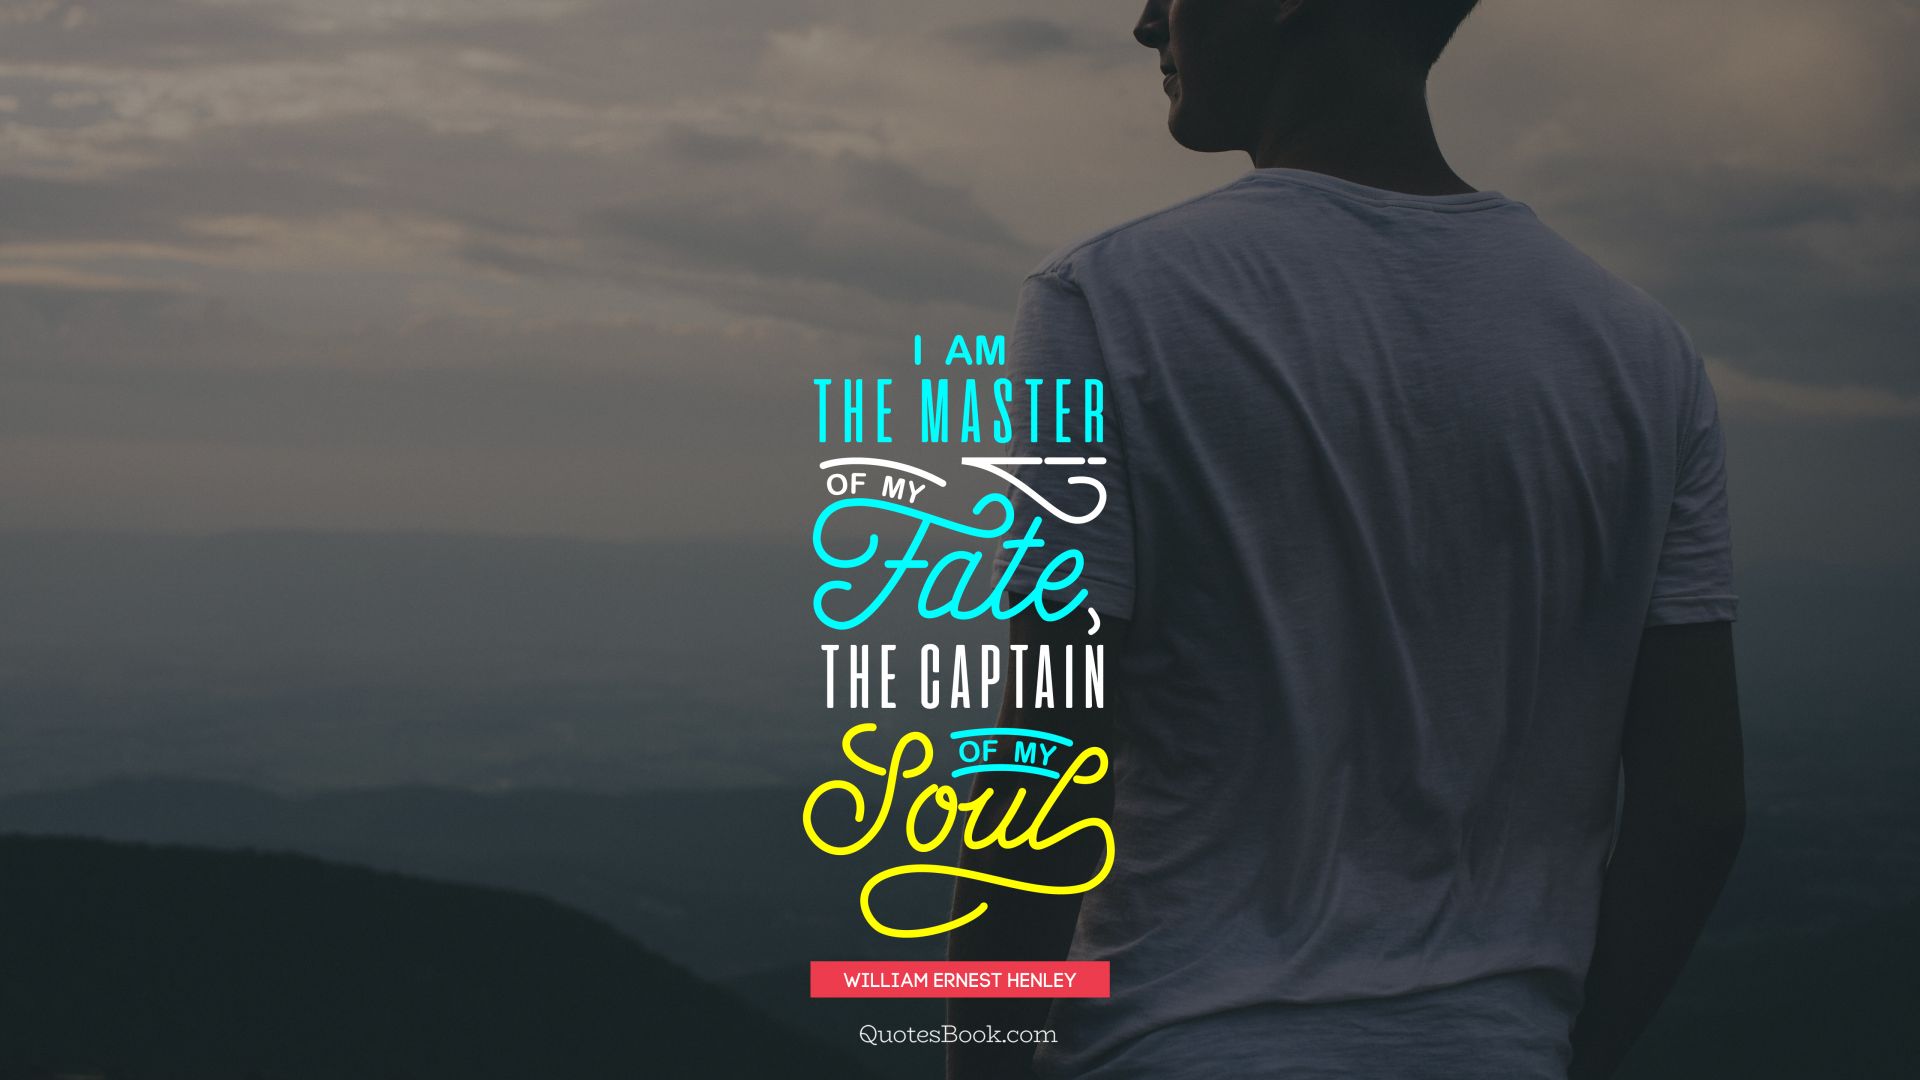 I am the master of my fate the captain of my soul. - Quote by William Ernest Henley